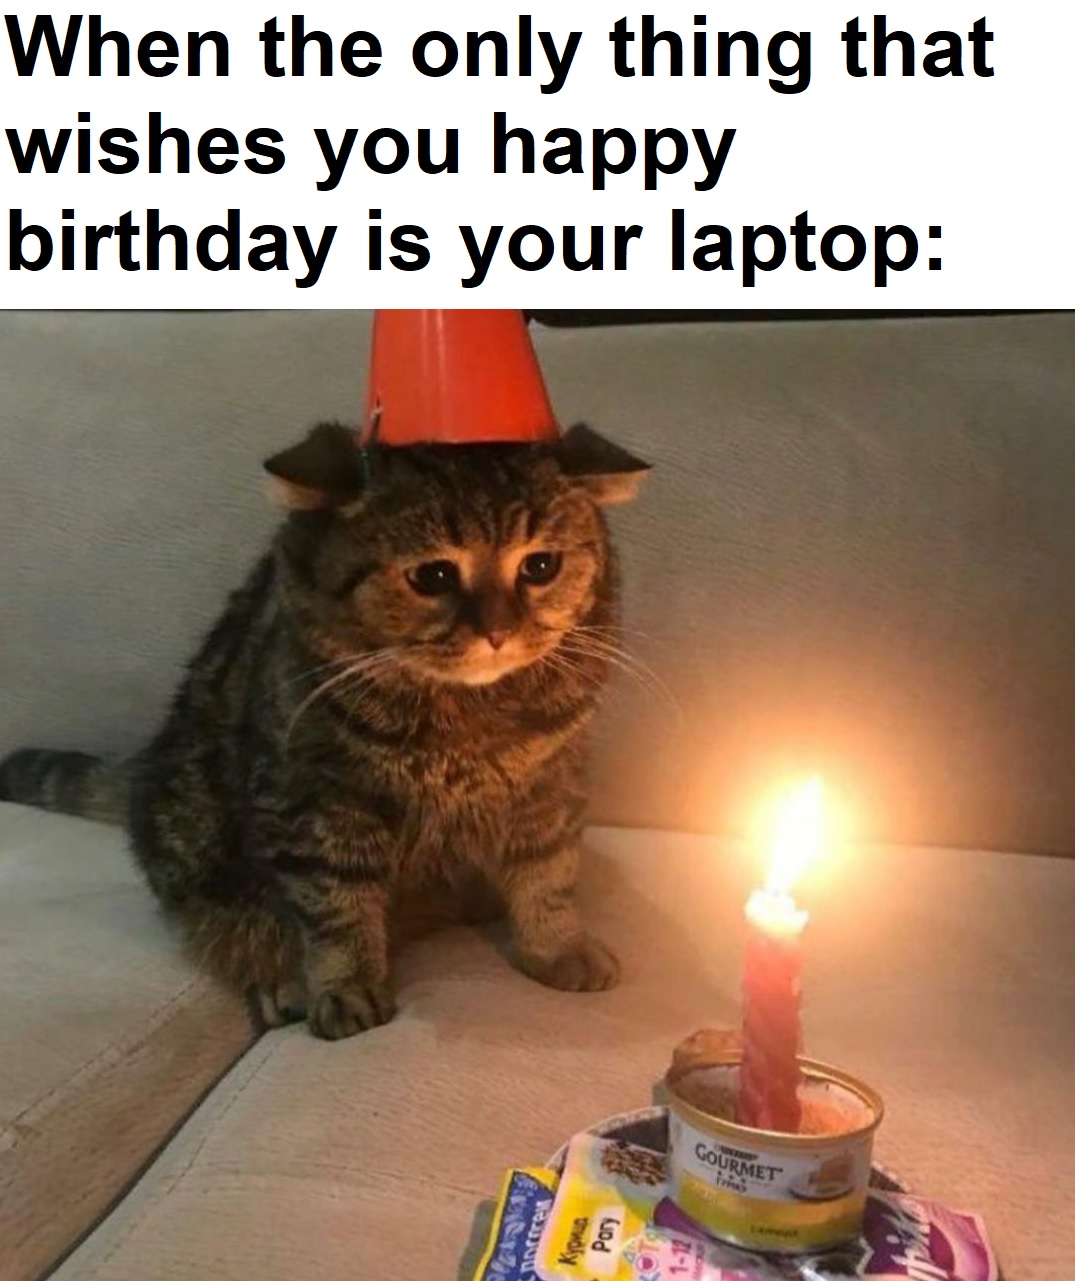 funny gaming memes - cat birthday - When the only thing that wishes you happy birthday is your laptop Gourmet Kyous Pory L